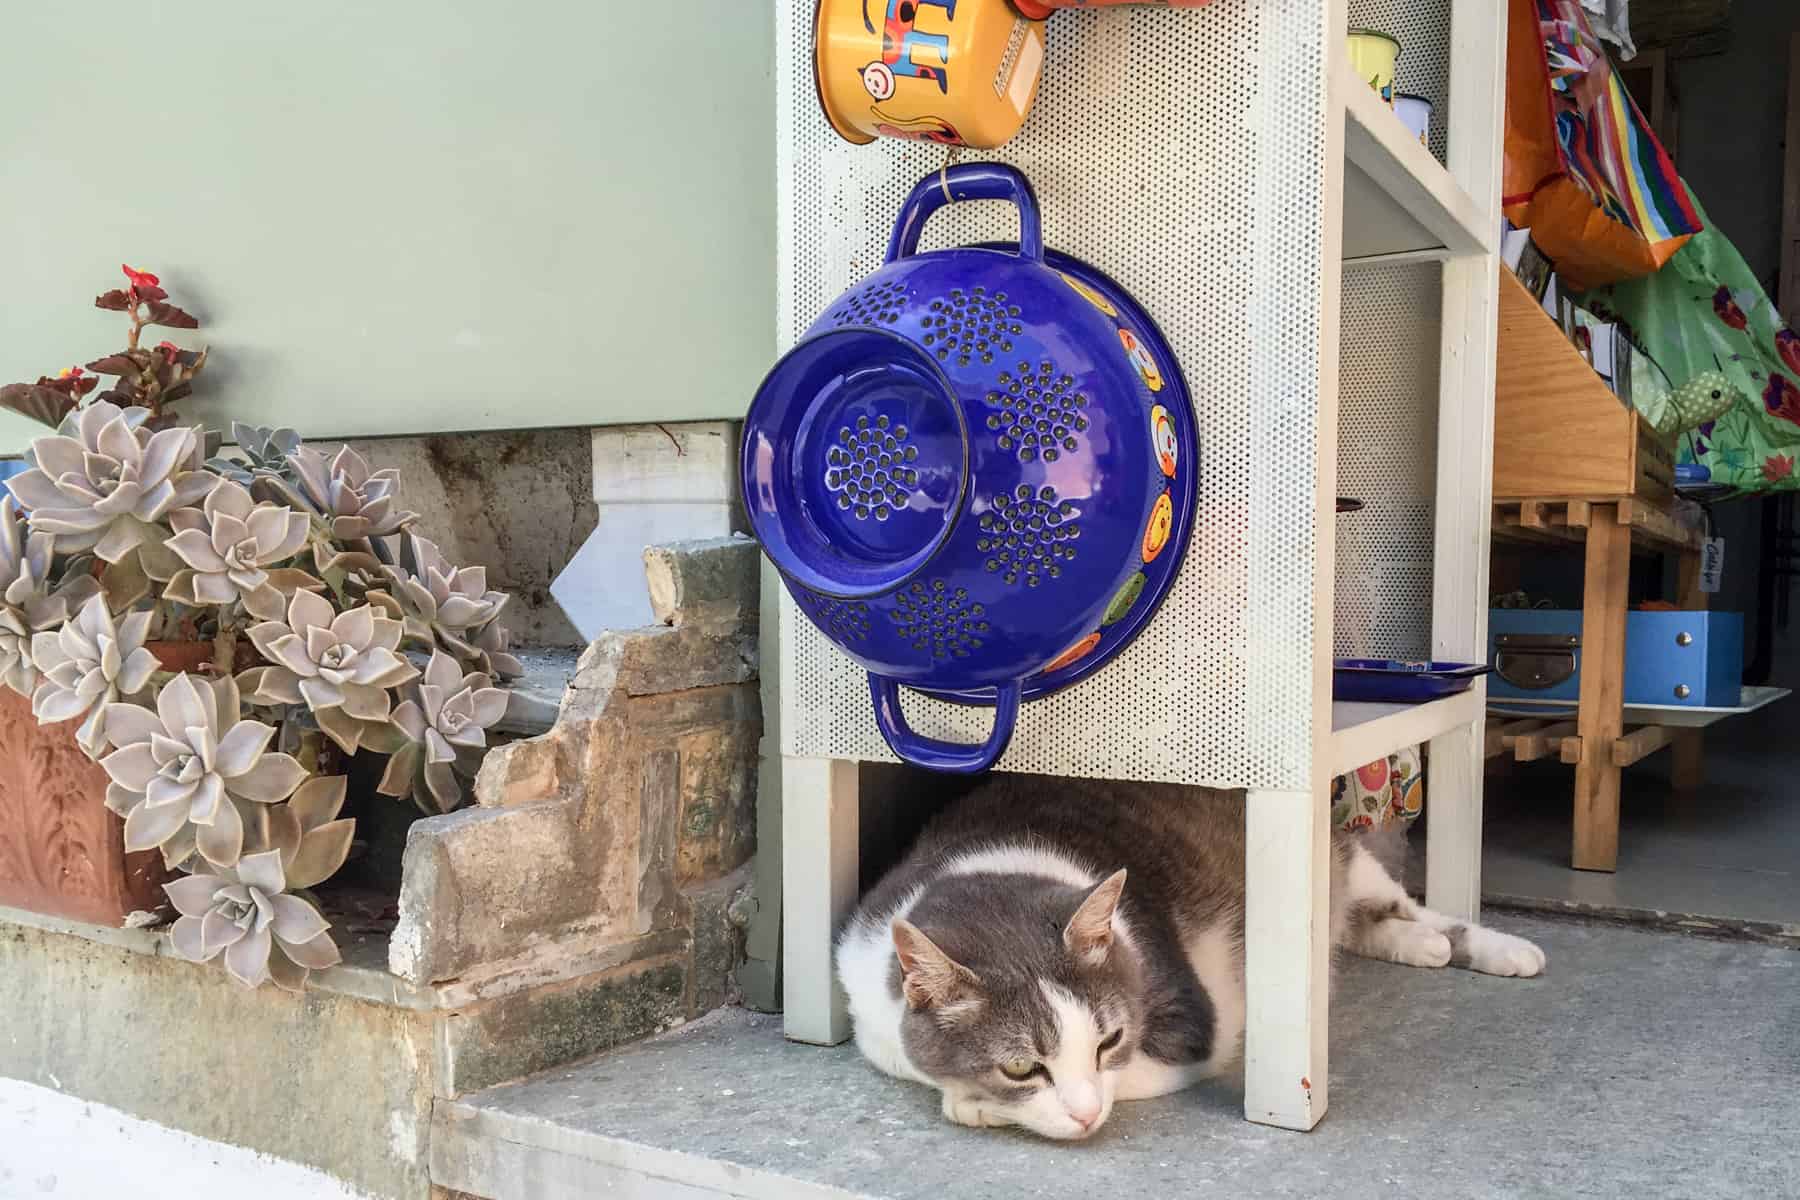 In Kea, a cat rests under a wooden cabinet with a blue bowl hanging on it